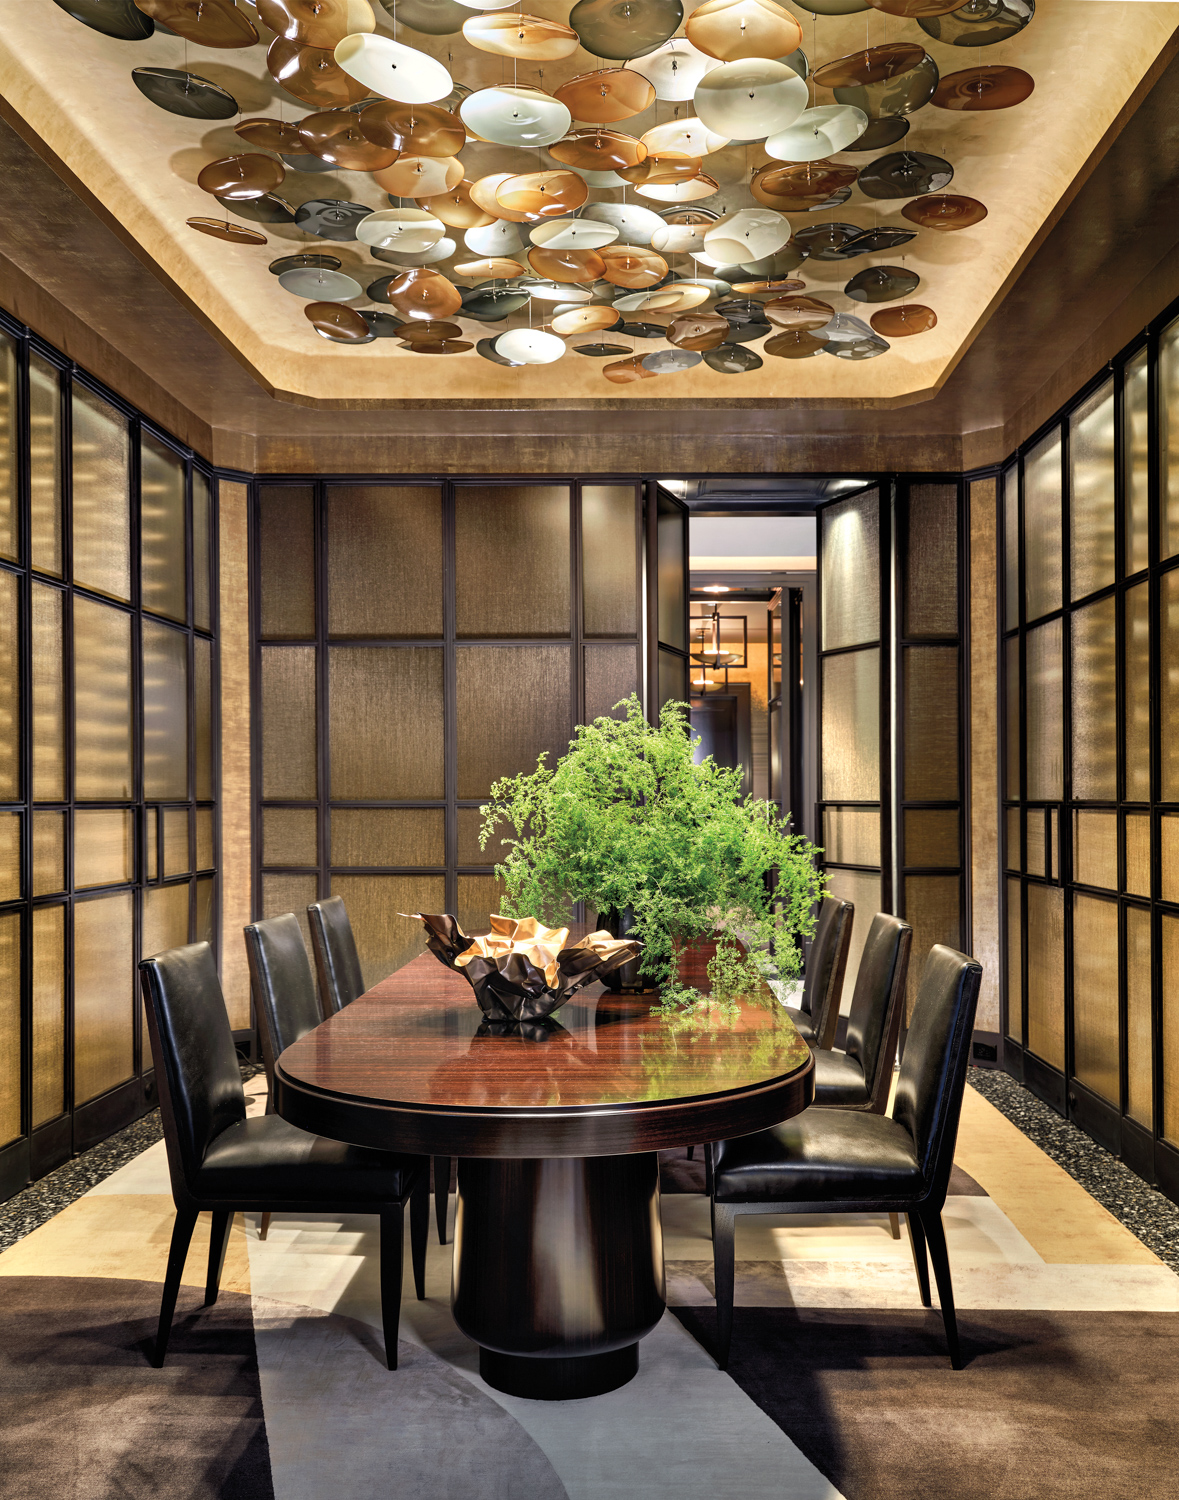 A gilded dining room with a blown-glass lighting installation above and a wine display cabinet.